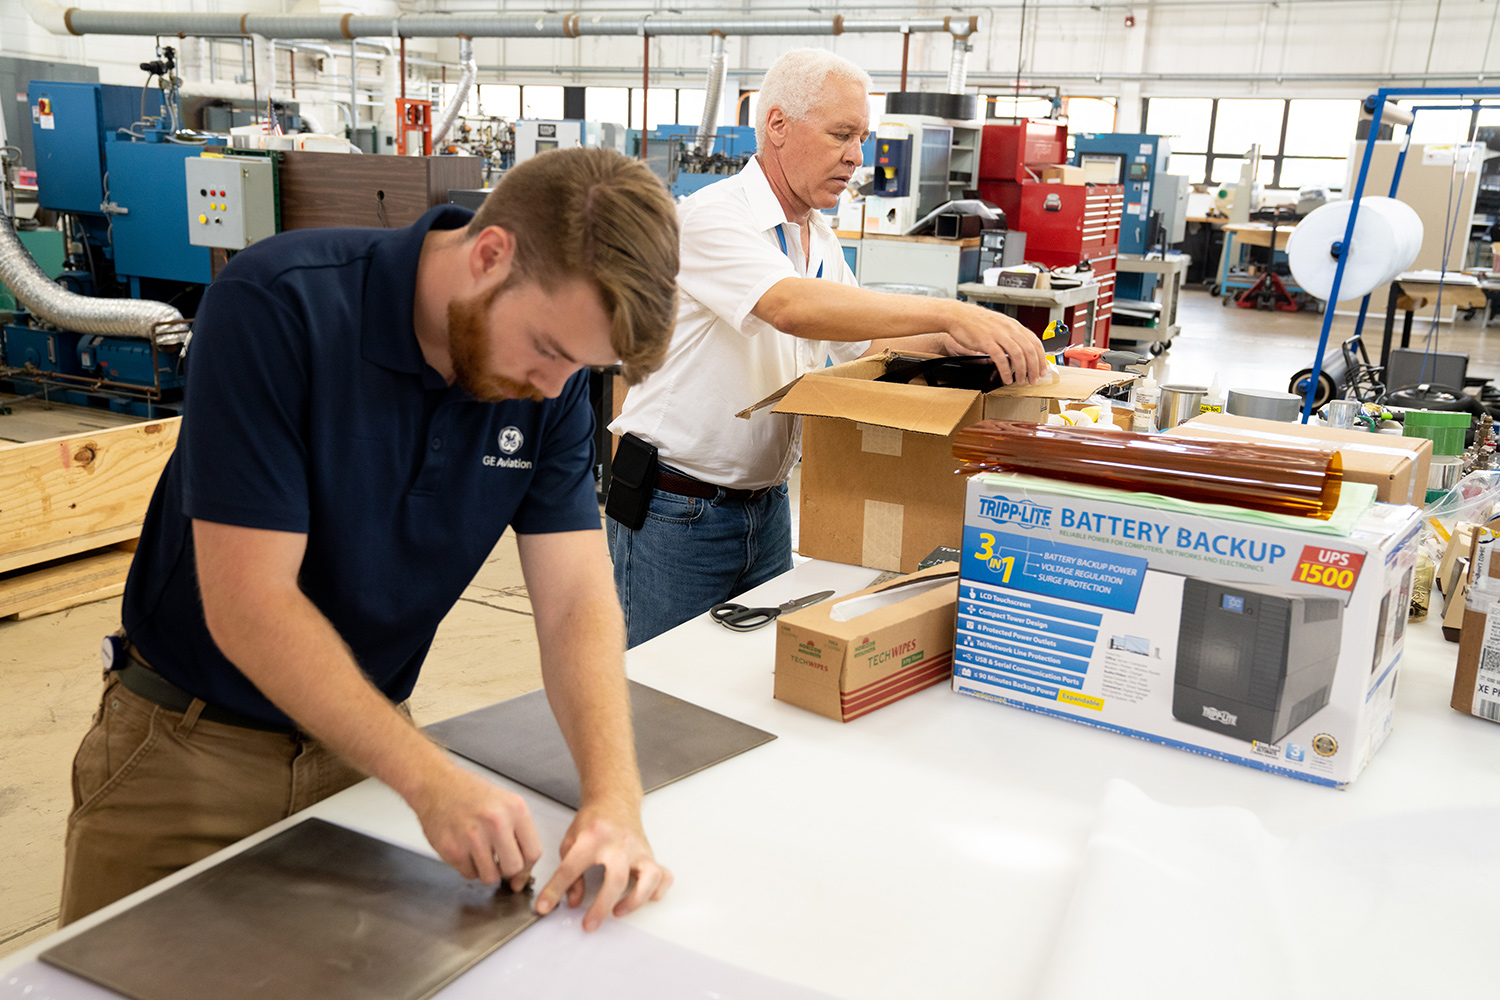 A man with light brown hair and beard wearing a navy blue polo and brown pants works with a sheet of metal while in the background Robert Bryant in a white button up shirt and jeans unboxes supplies